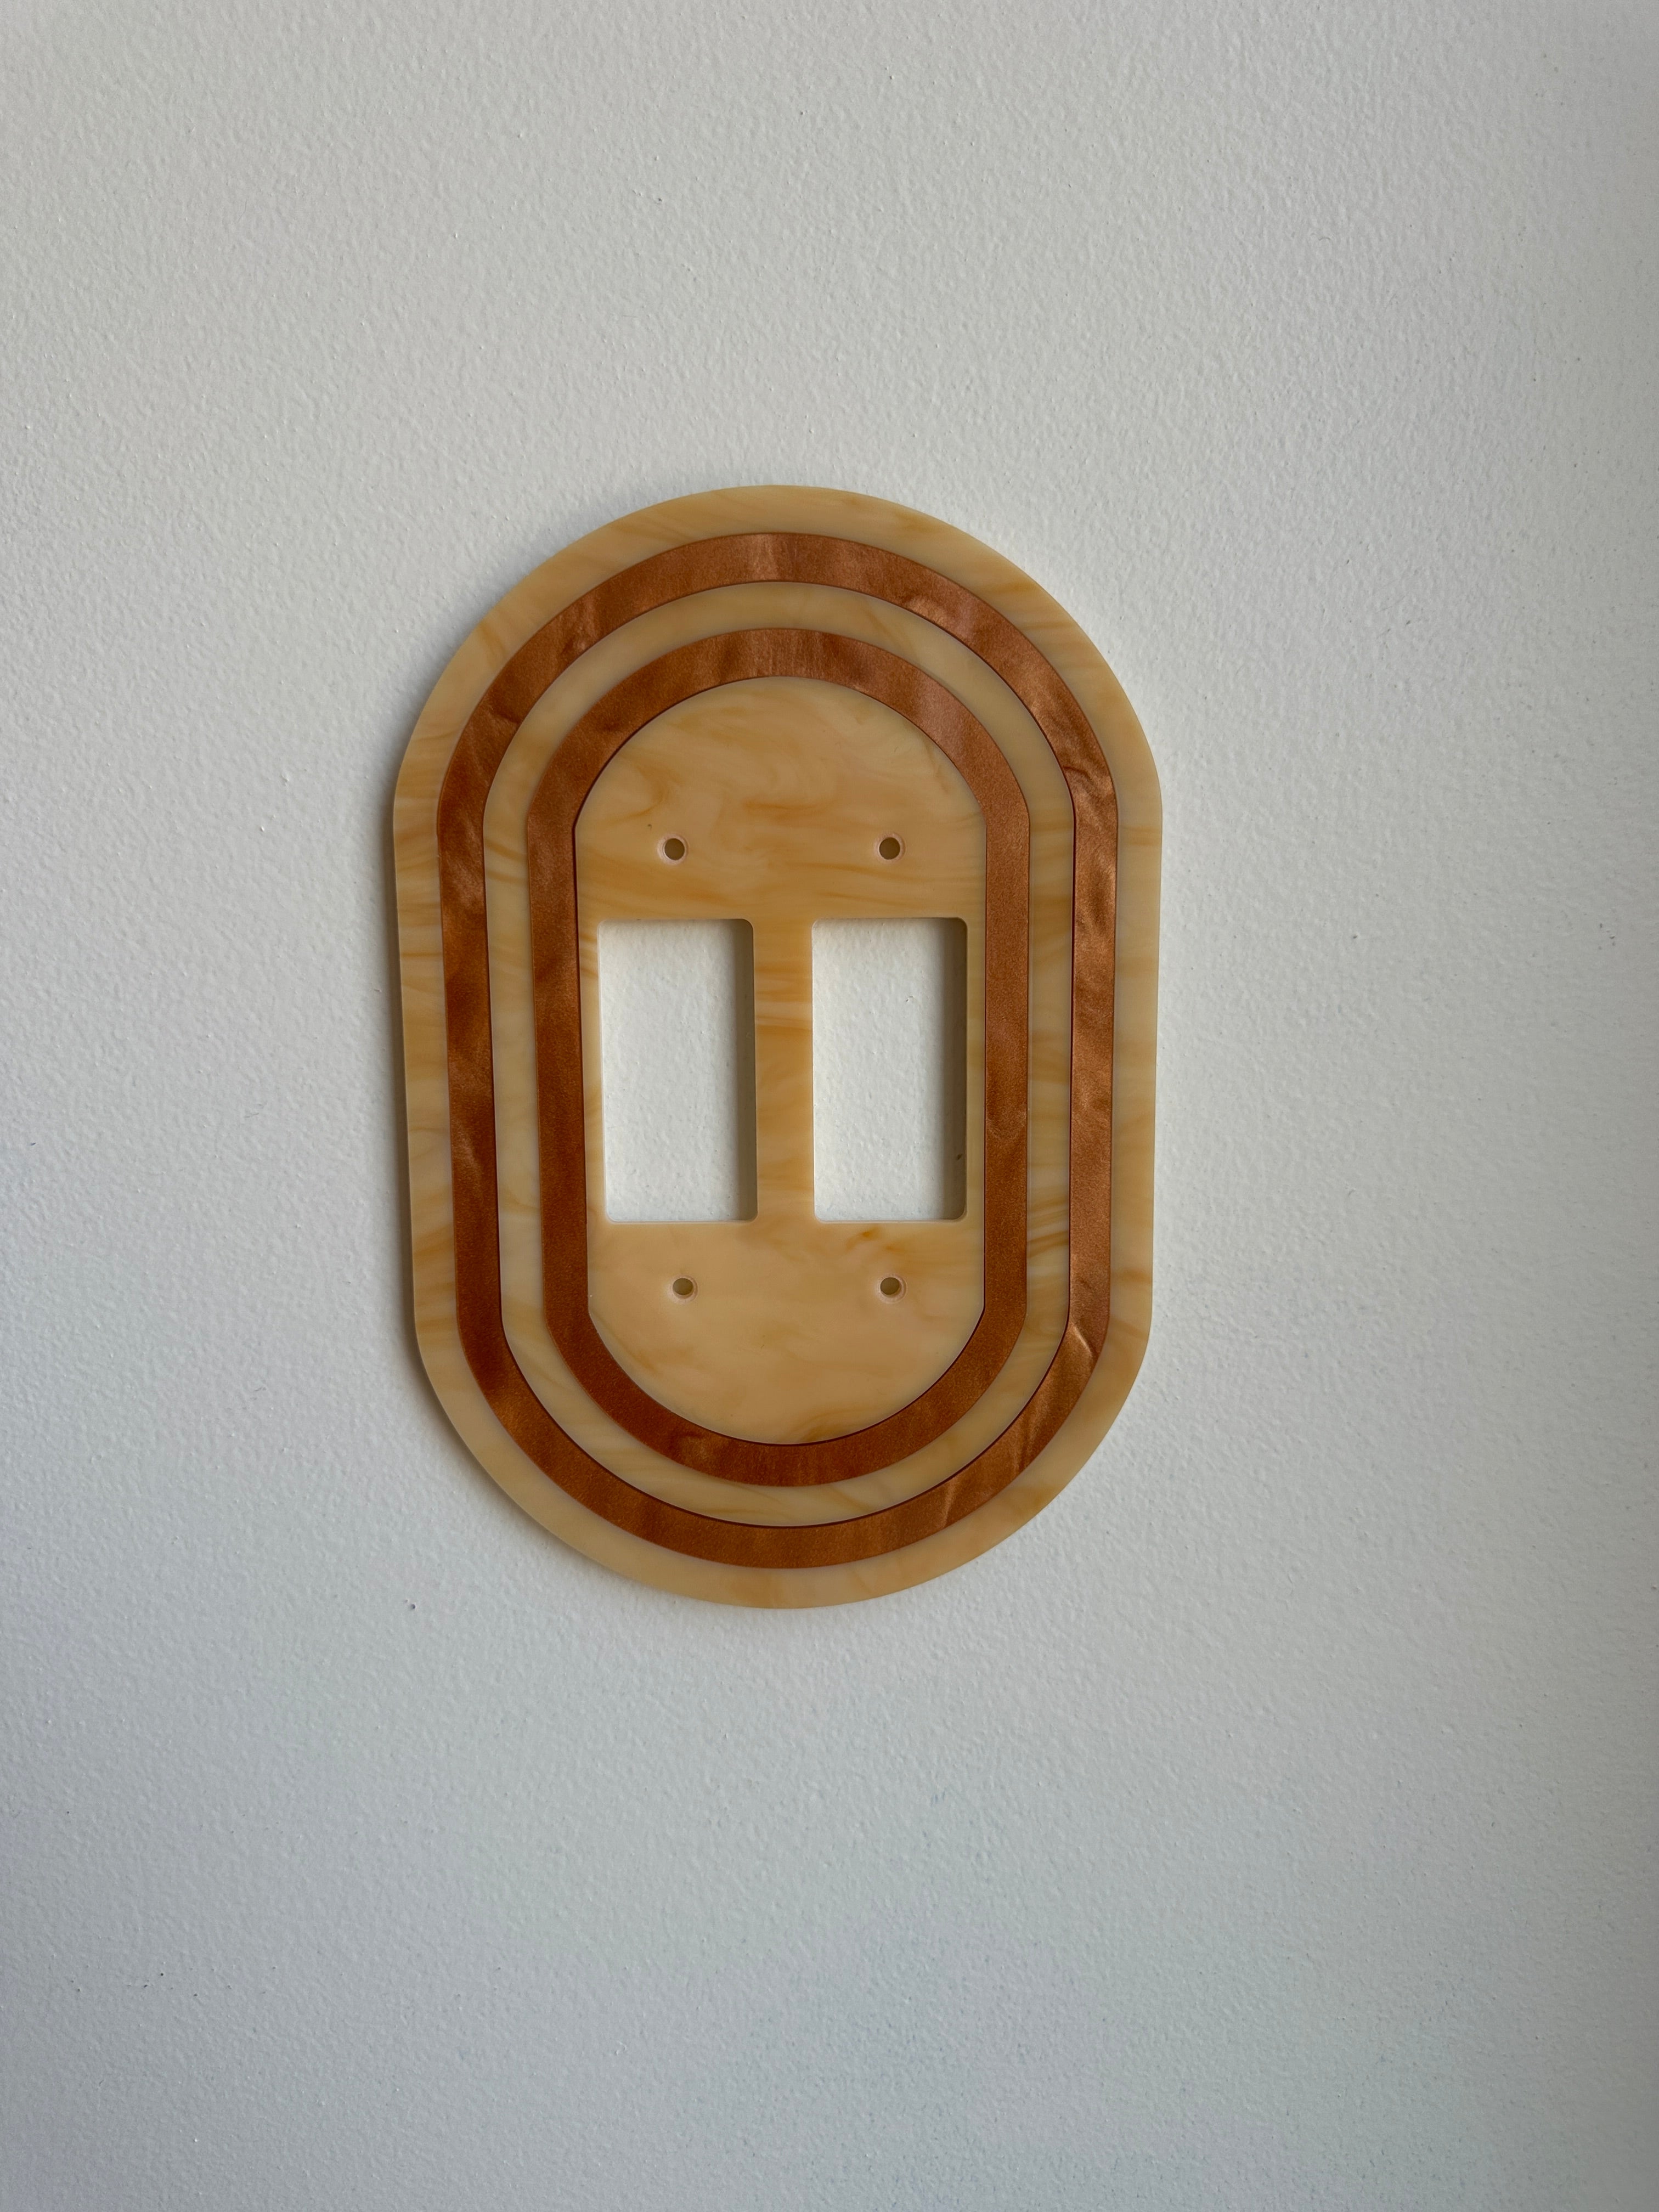 Acoustic Wave Layered Portal Light Switch Sample Sale